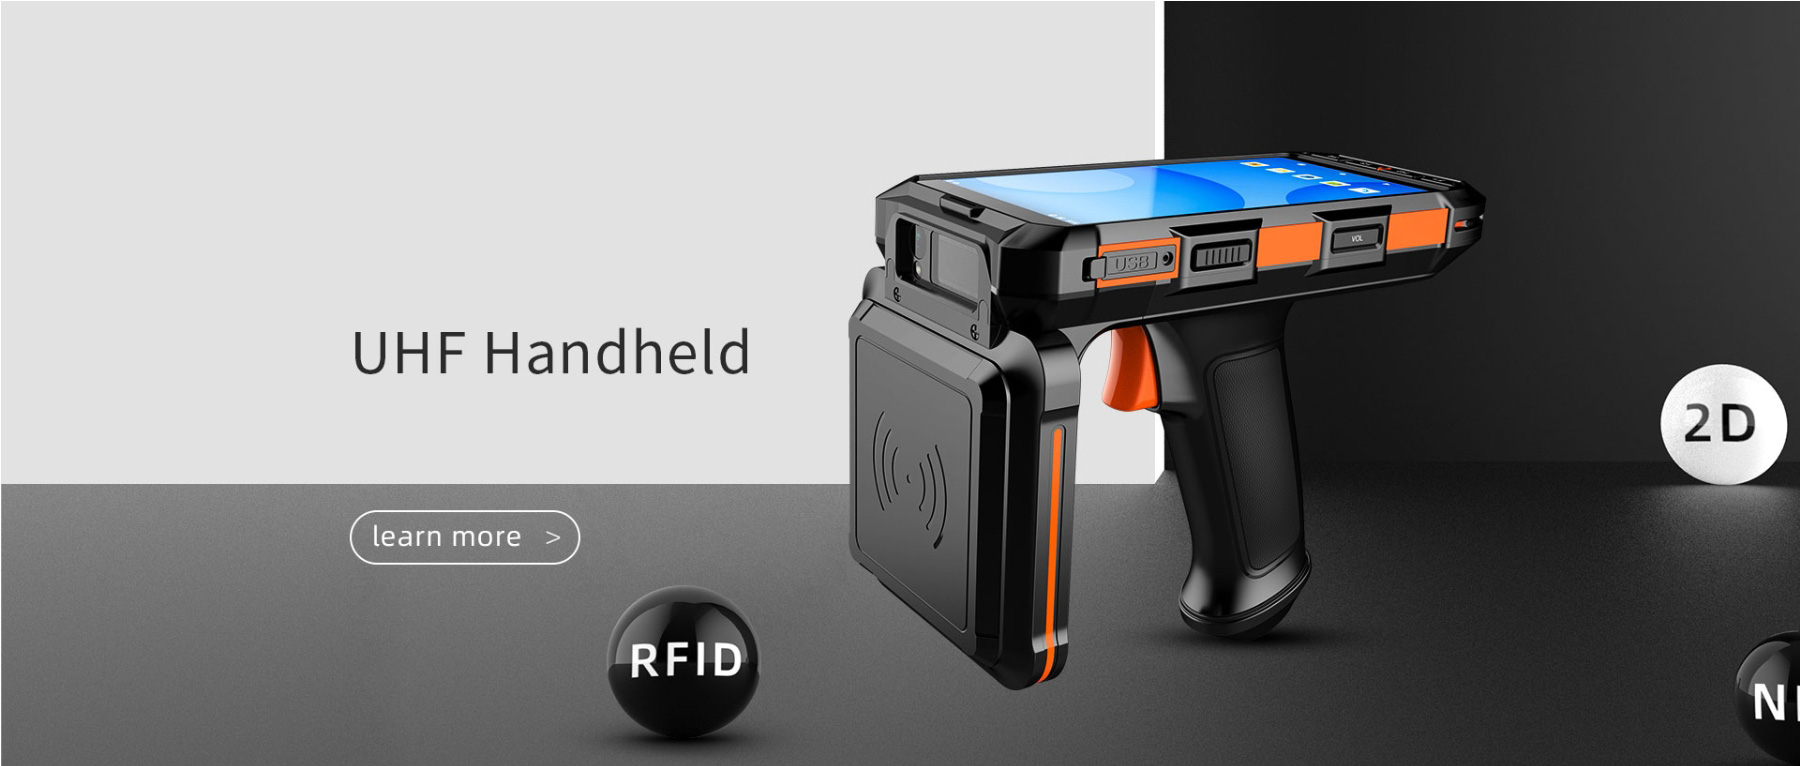 Handheld (Including tablet, Handheld devices,wearable devices, etc.) refers to mobile, portable UHF RFID reader devices, of which handheld is the most common form.  This type of product is characteriz